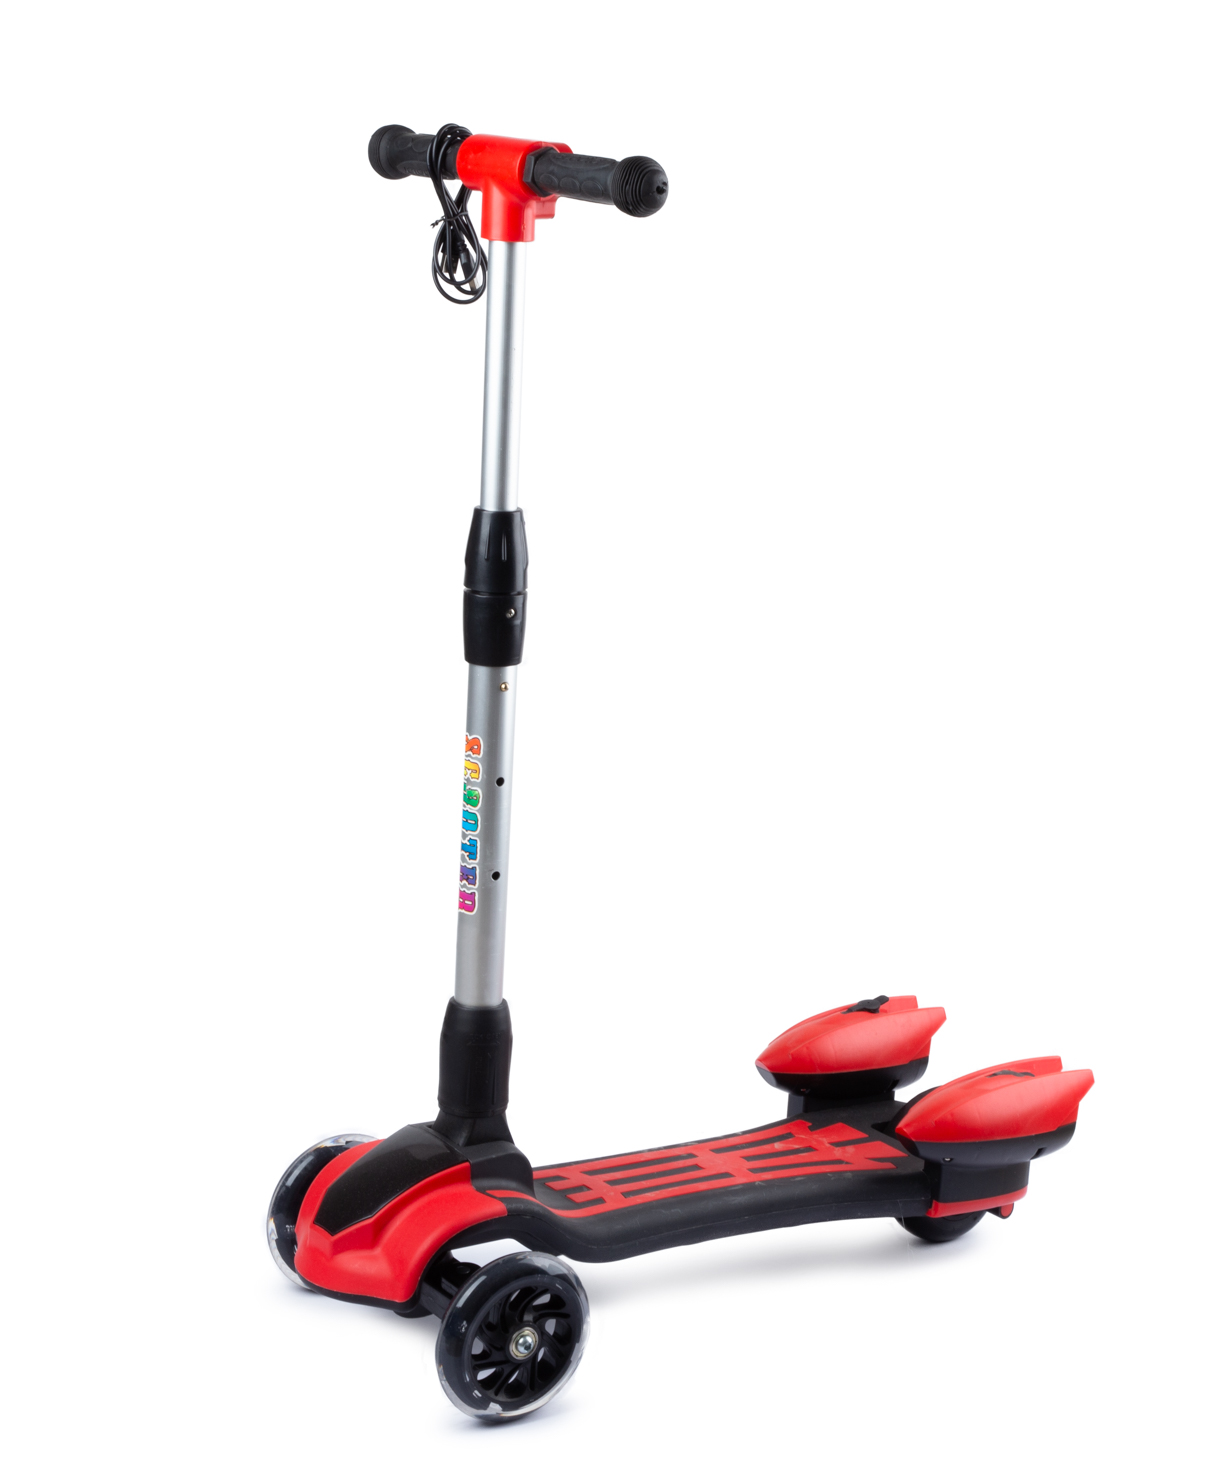 Scooter PE-15073 with light effect, steam and sound signal